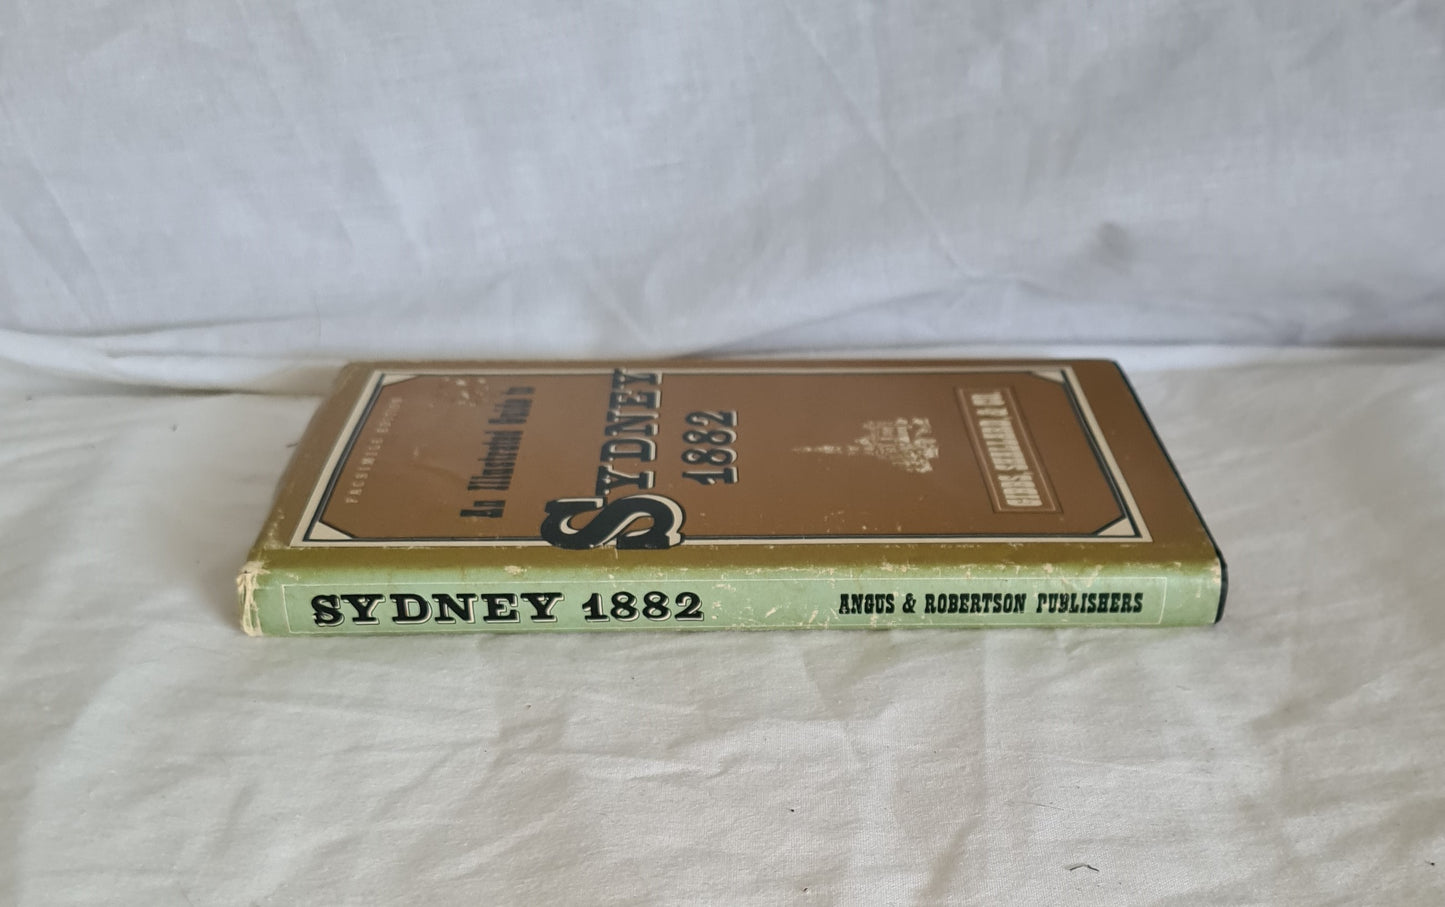 An Illustrated Guide to Sydney and its Suburbs 1882 by Gibbs, Shallard & Co.